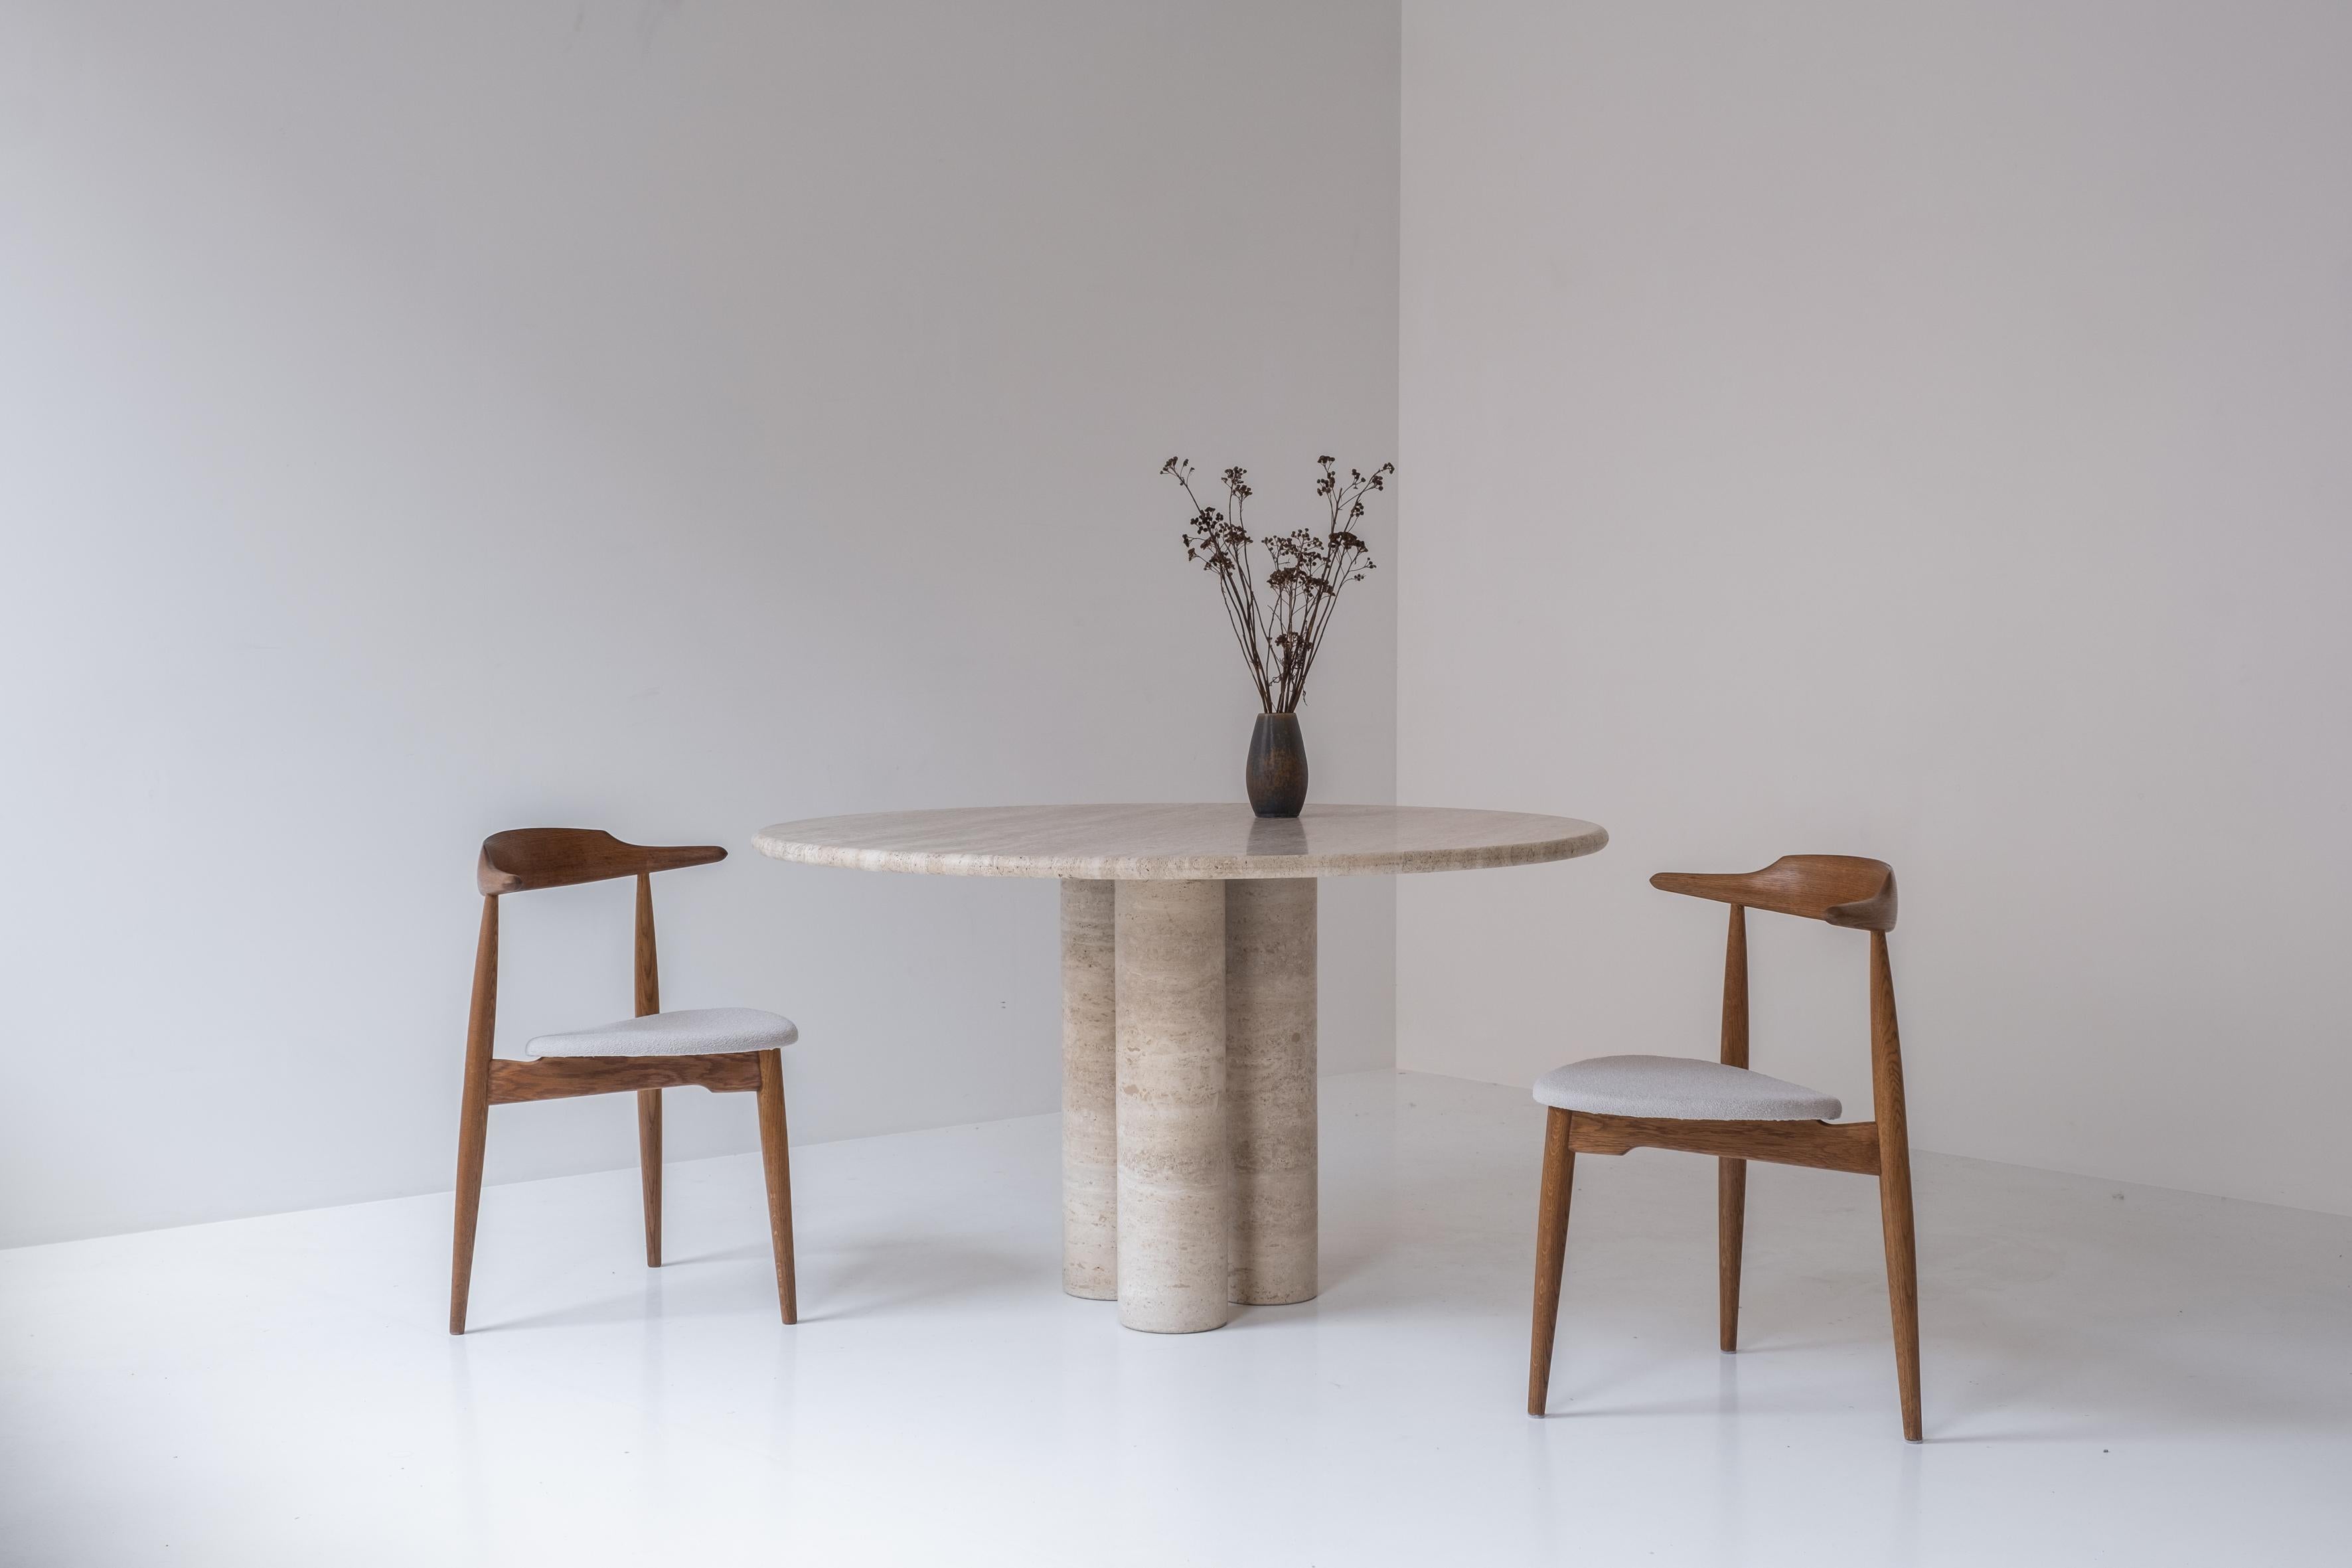 Admire this lovely round dining table by Mario Bellini for Cassina, Italy 1970s. This Il Colonnato table is made out of travertine and features three cylindrical columns holding the top with round edges. This is a very rare table as this model was